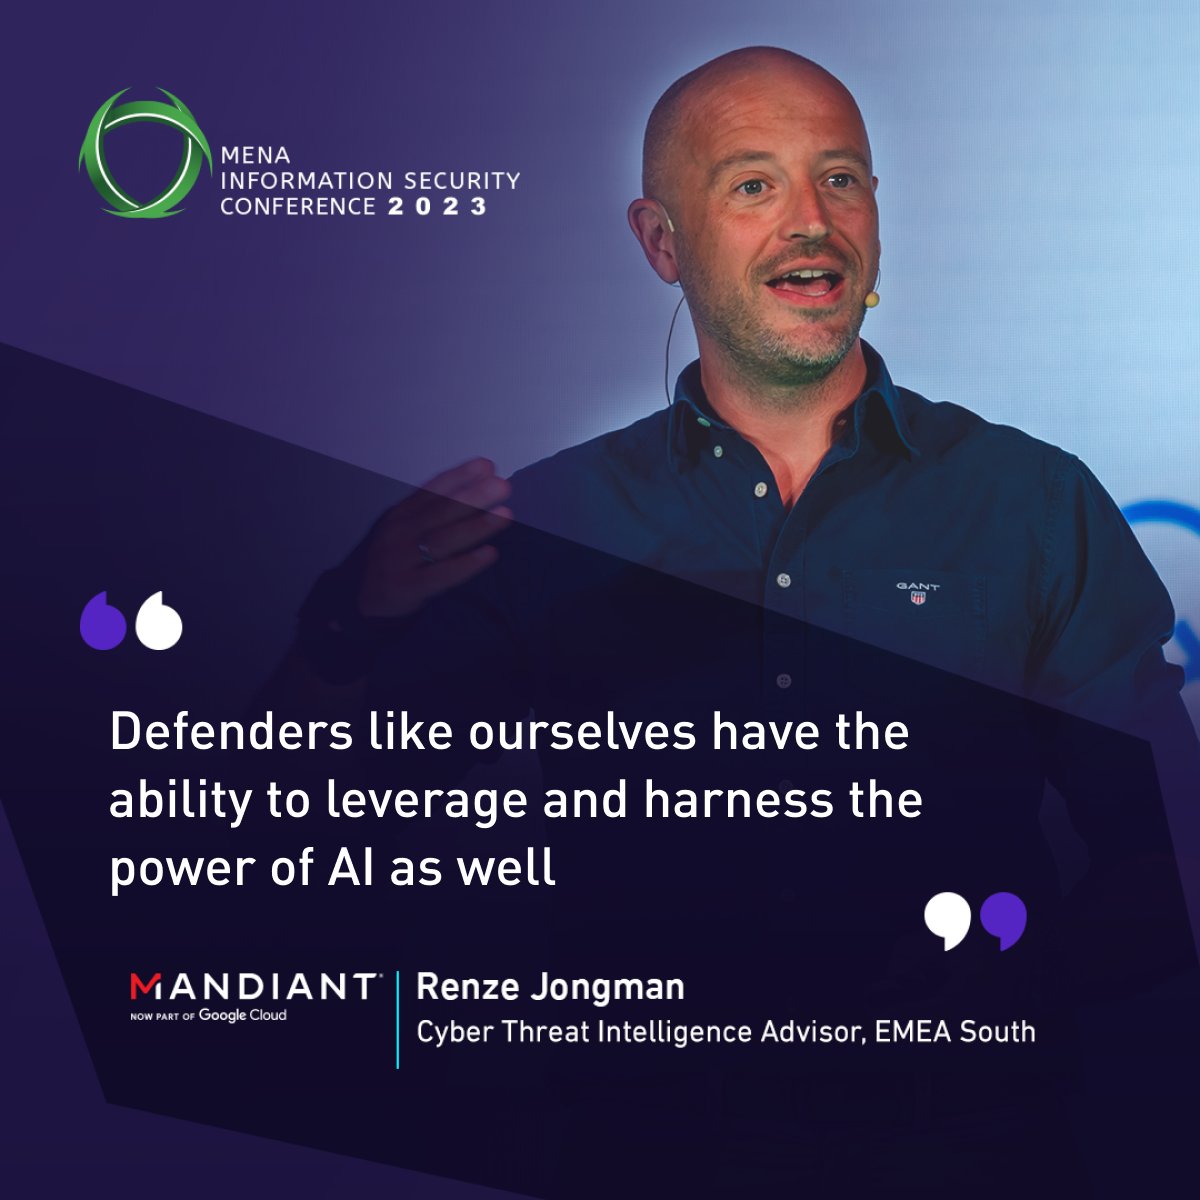 Renze Jongman discusses AI-driven threat landscape, where threat actors use AI in social engineering attacks.
See how organizations combat malicious language models and boost cybersecurity: 

bit.ly/3TzXQty

#Mandiant #ThreatDefense #Virtuport #SocialEngineering #AI